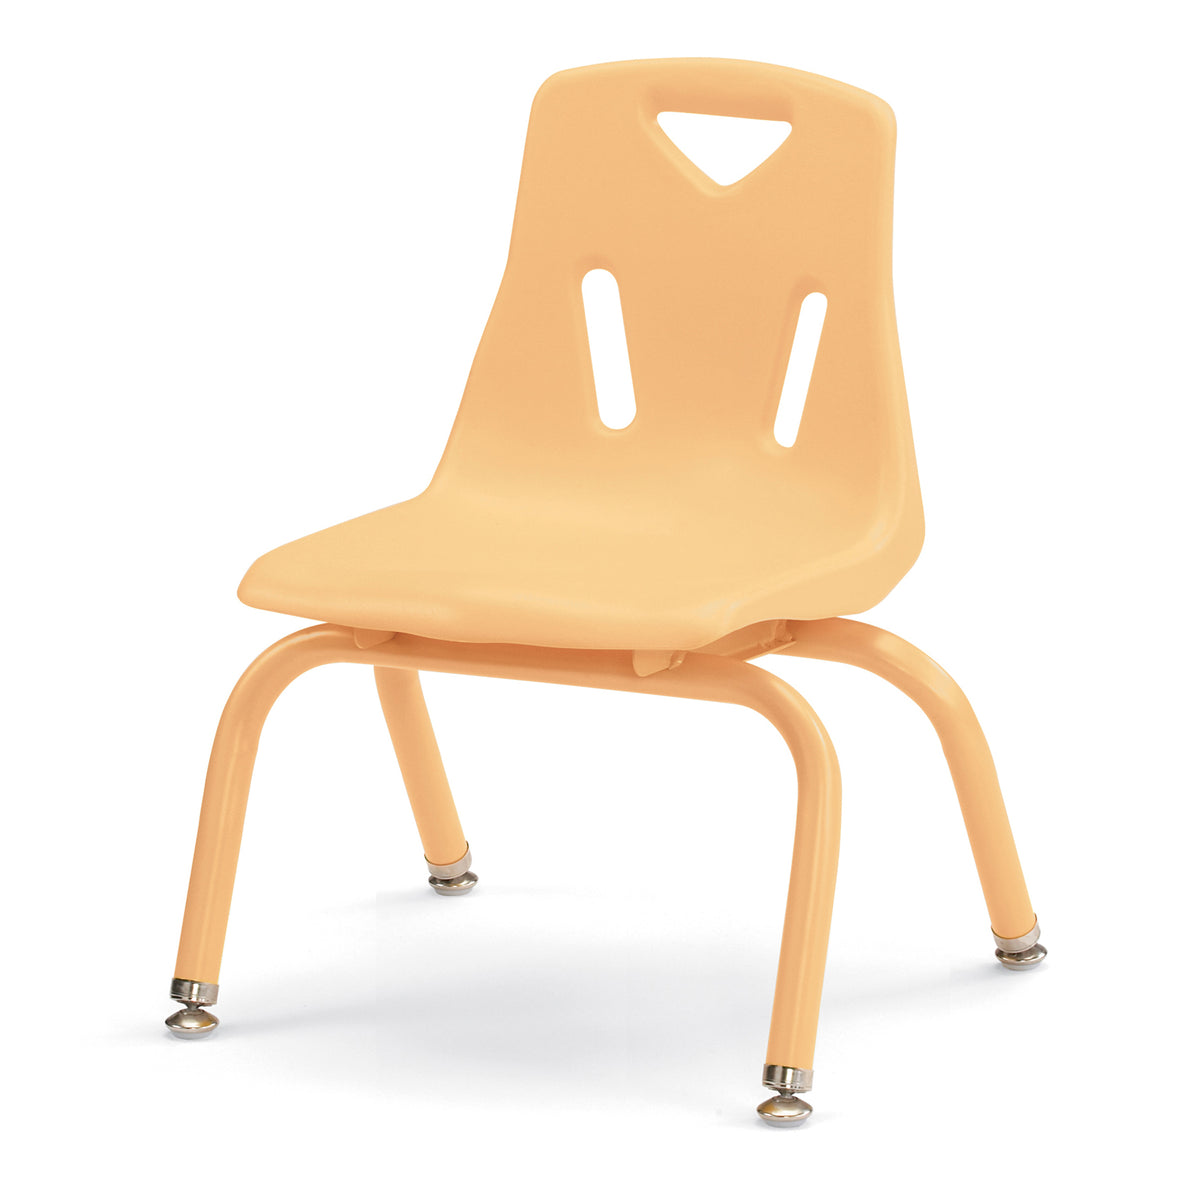 8120JC1251, Berries Stacking Chair with Powder-Coated Legs - 10" Ht - Camel